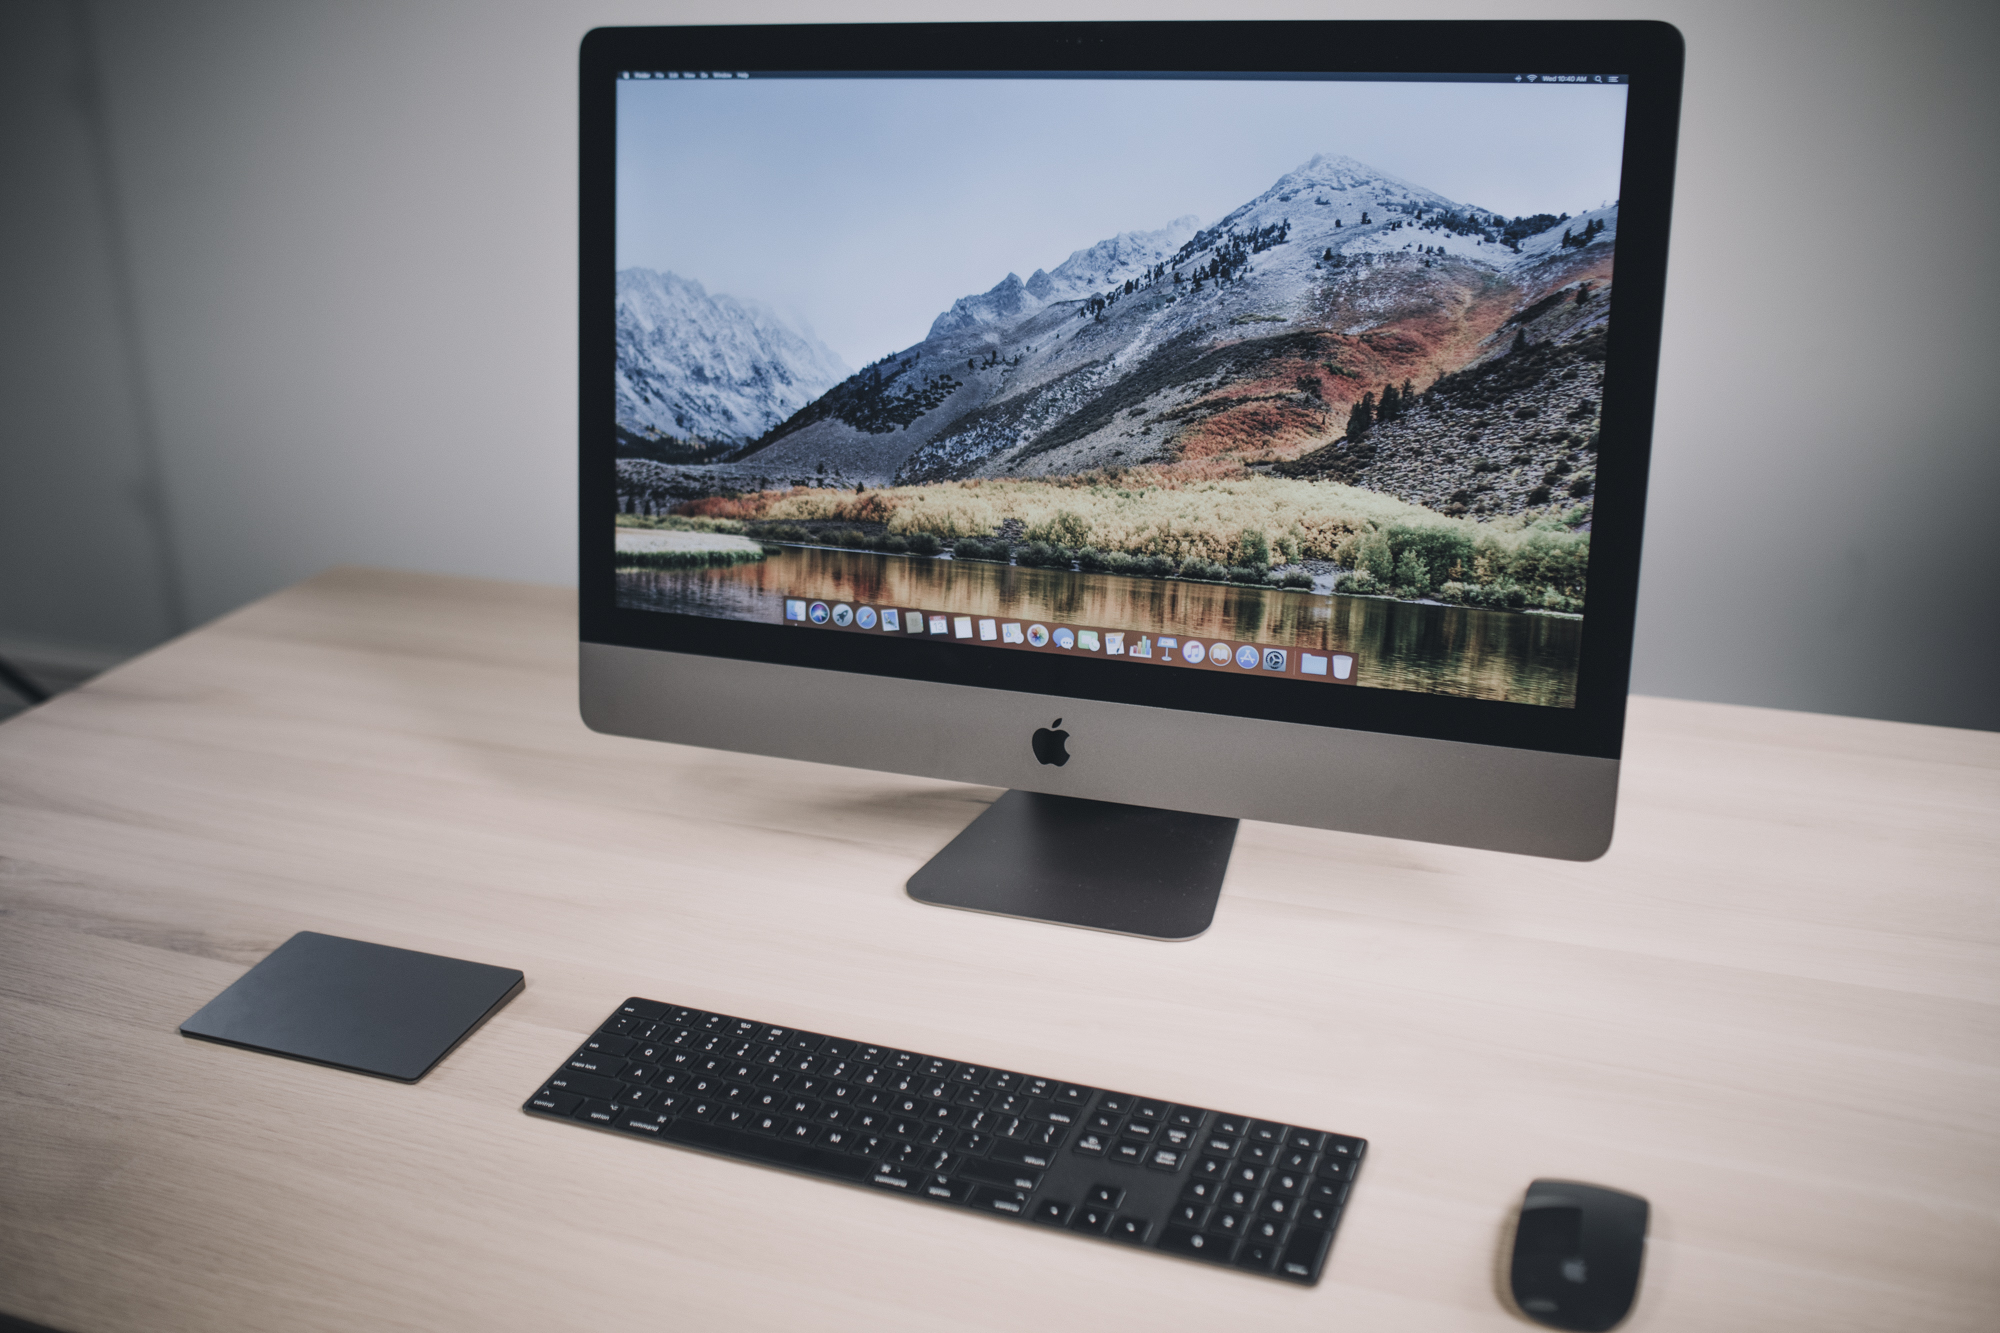 You can now pick up an iMac Pro in-store, for $4,999 and up